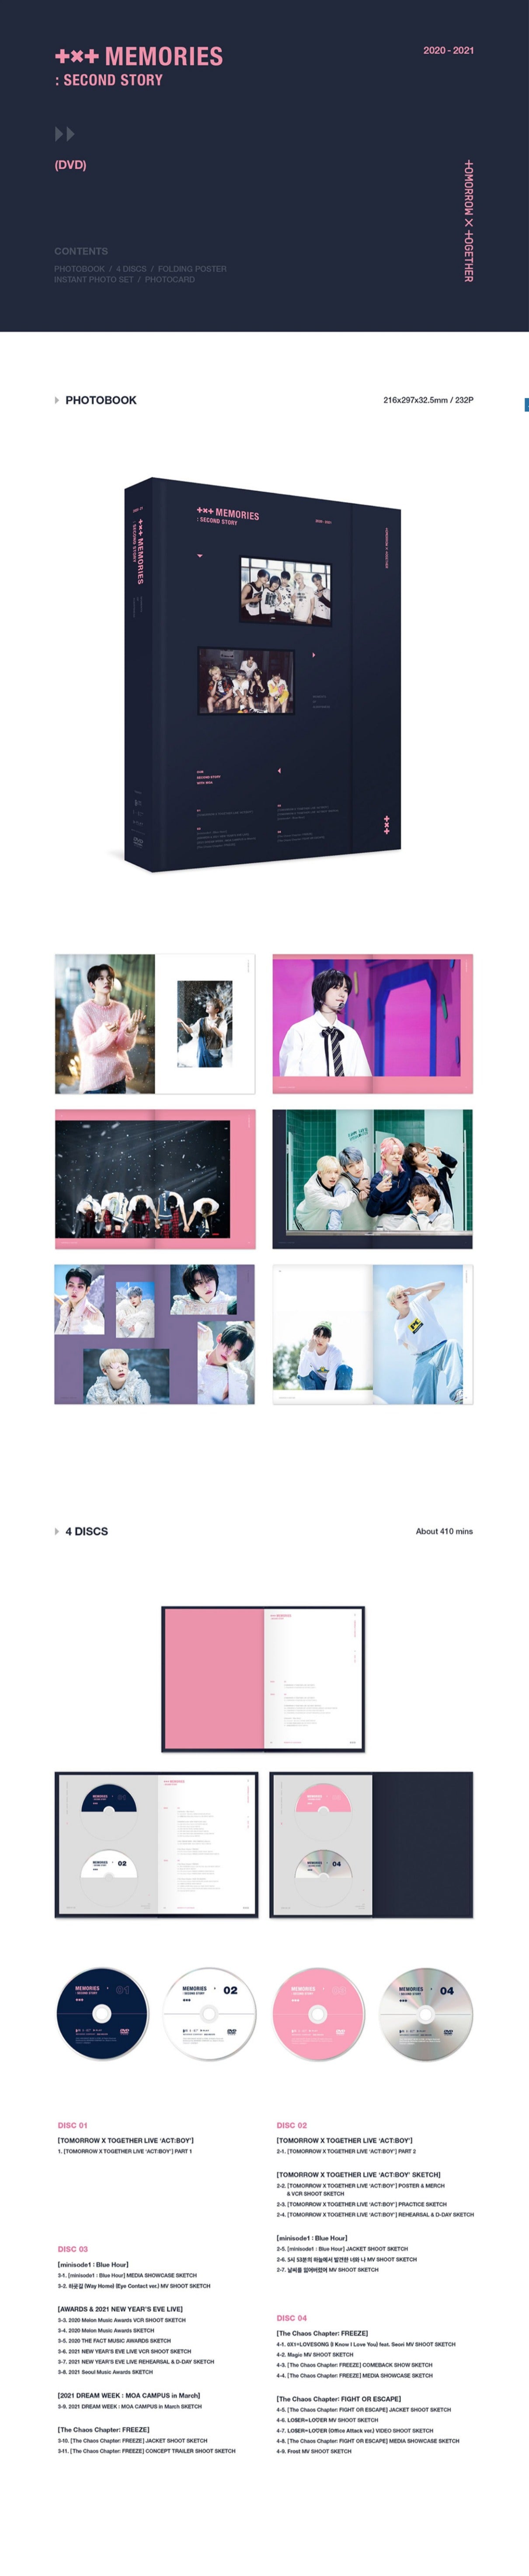 [TOMORROW X TOGETHER] TXT - Memories Second Story DVD